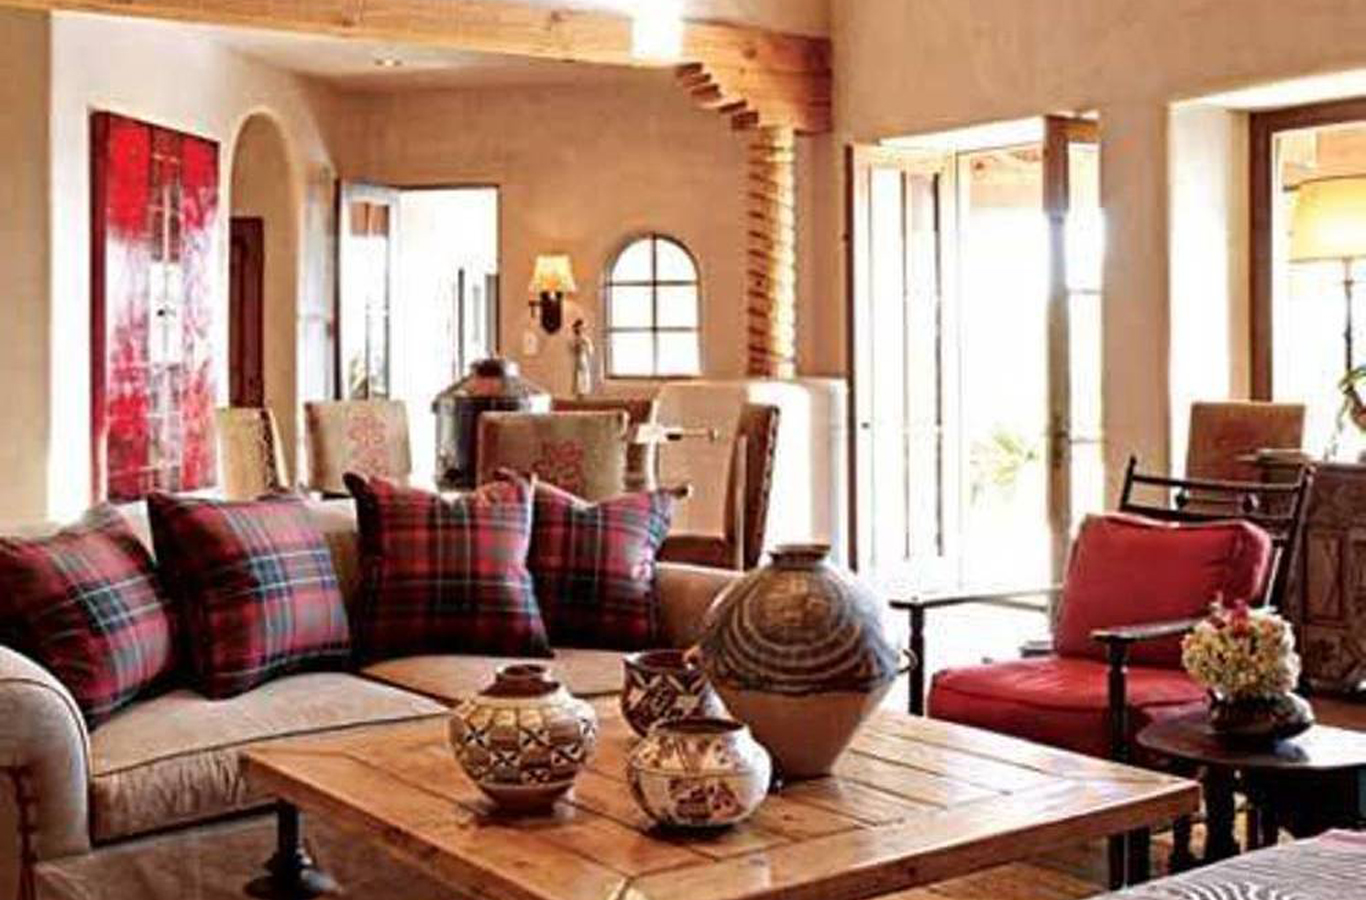 Southwest Home Décor to Make House More Beautiful with Ethnic Style